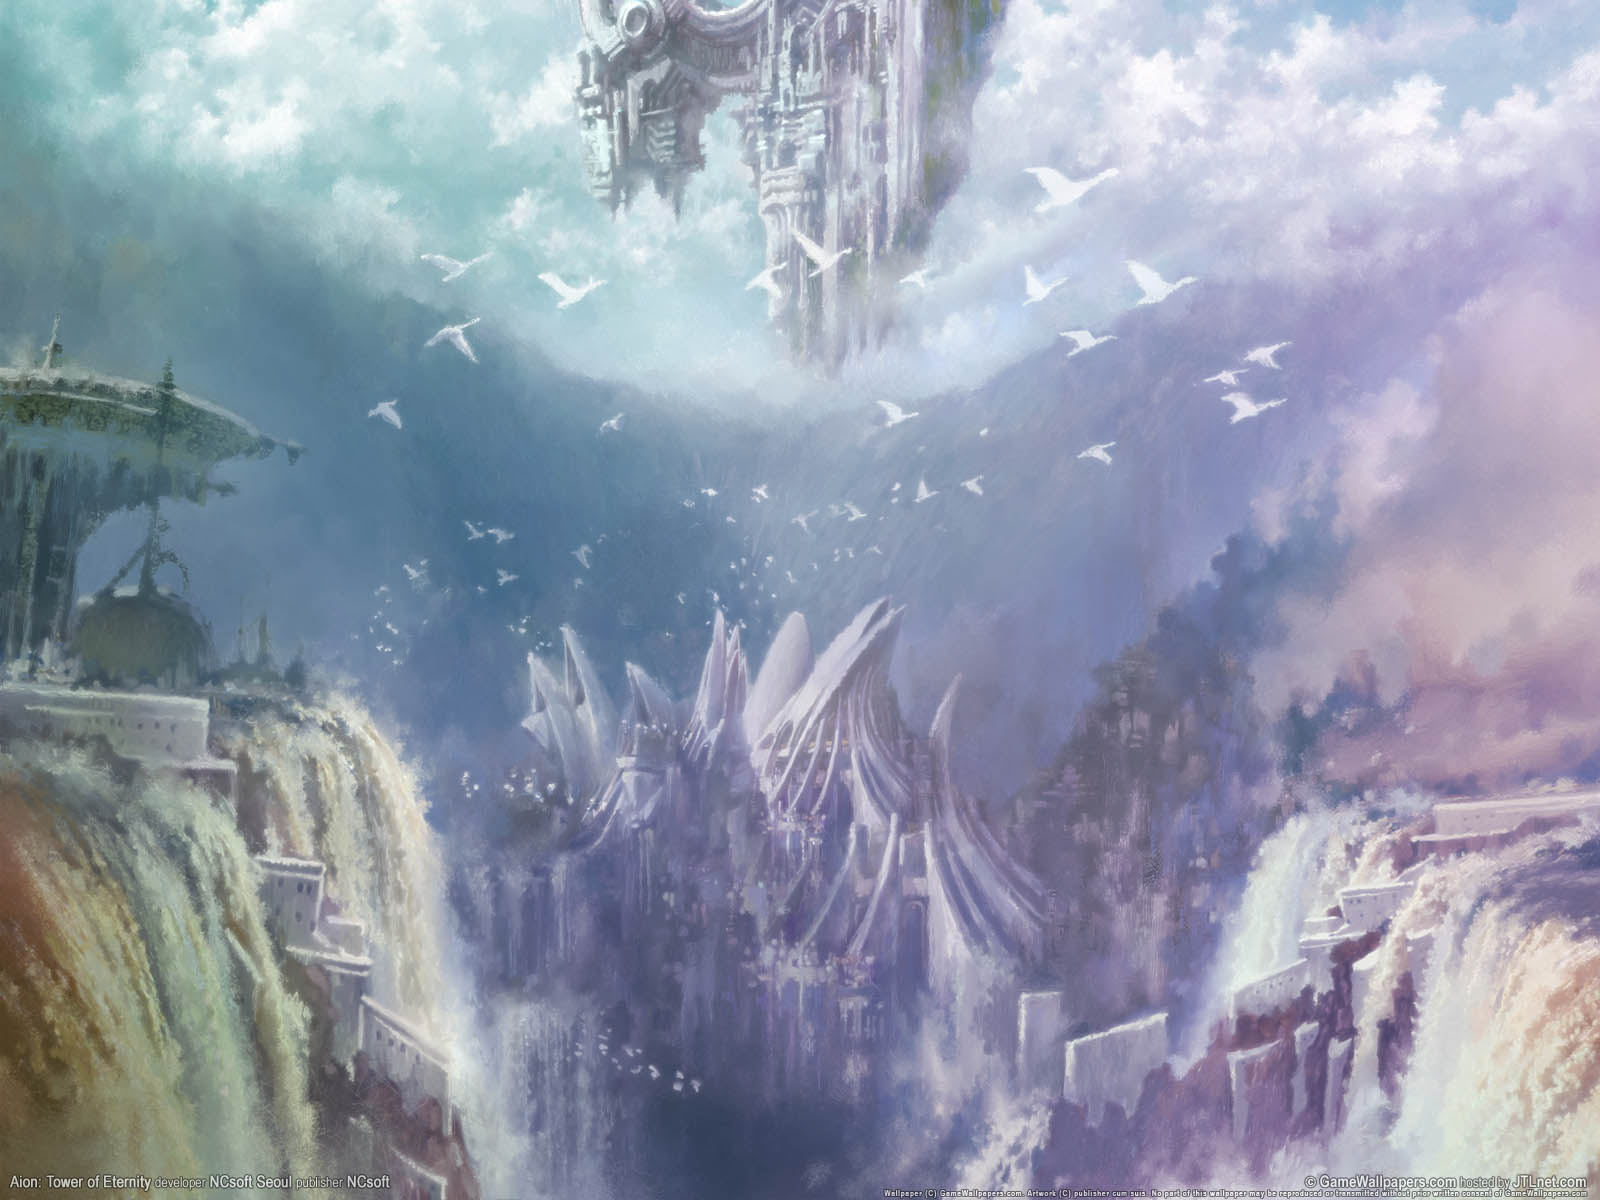 Aion%253A Tower of Eternity wallpaper 07 1600x1200